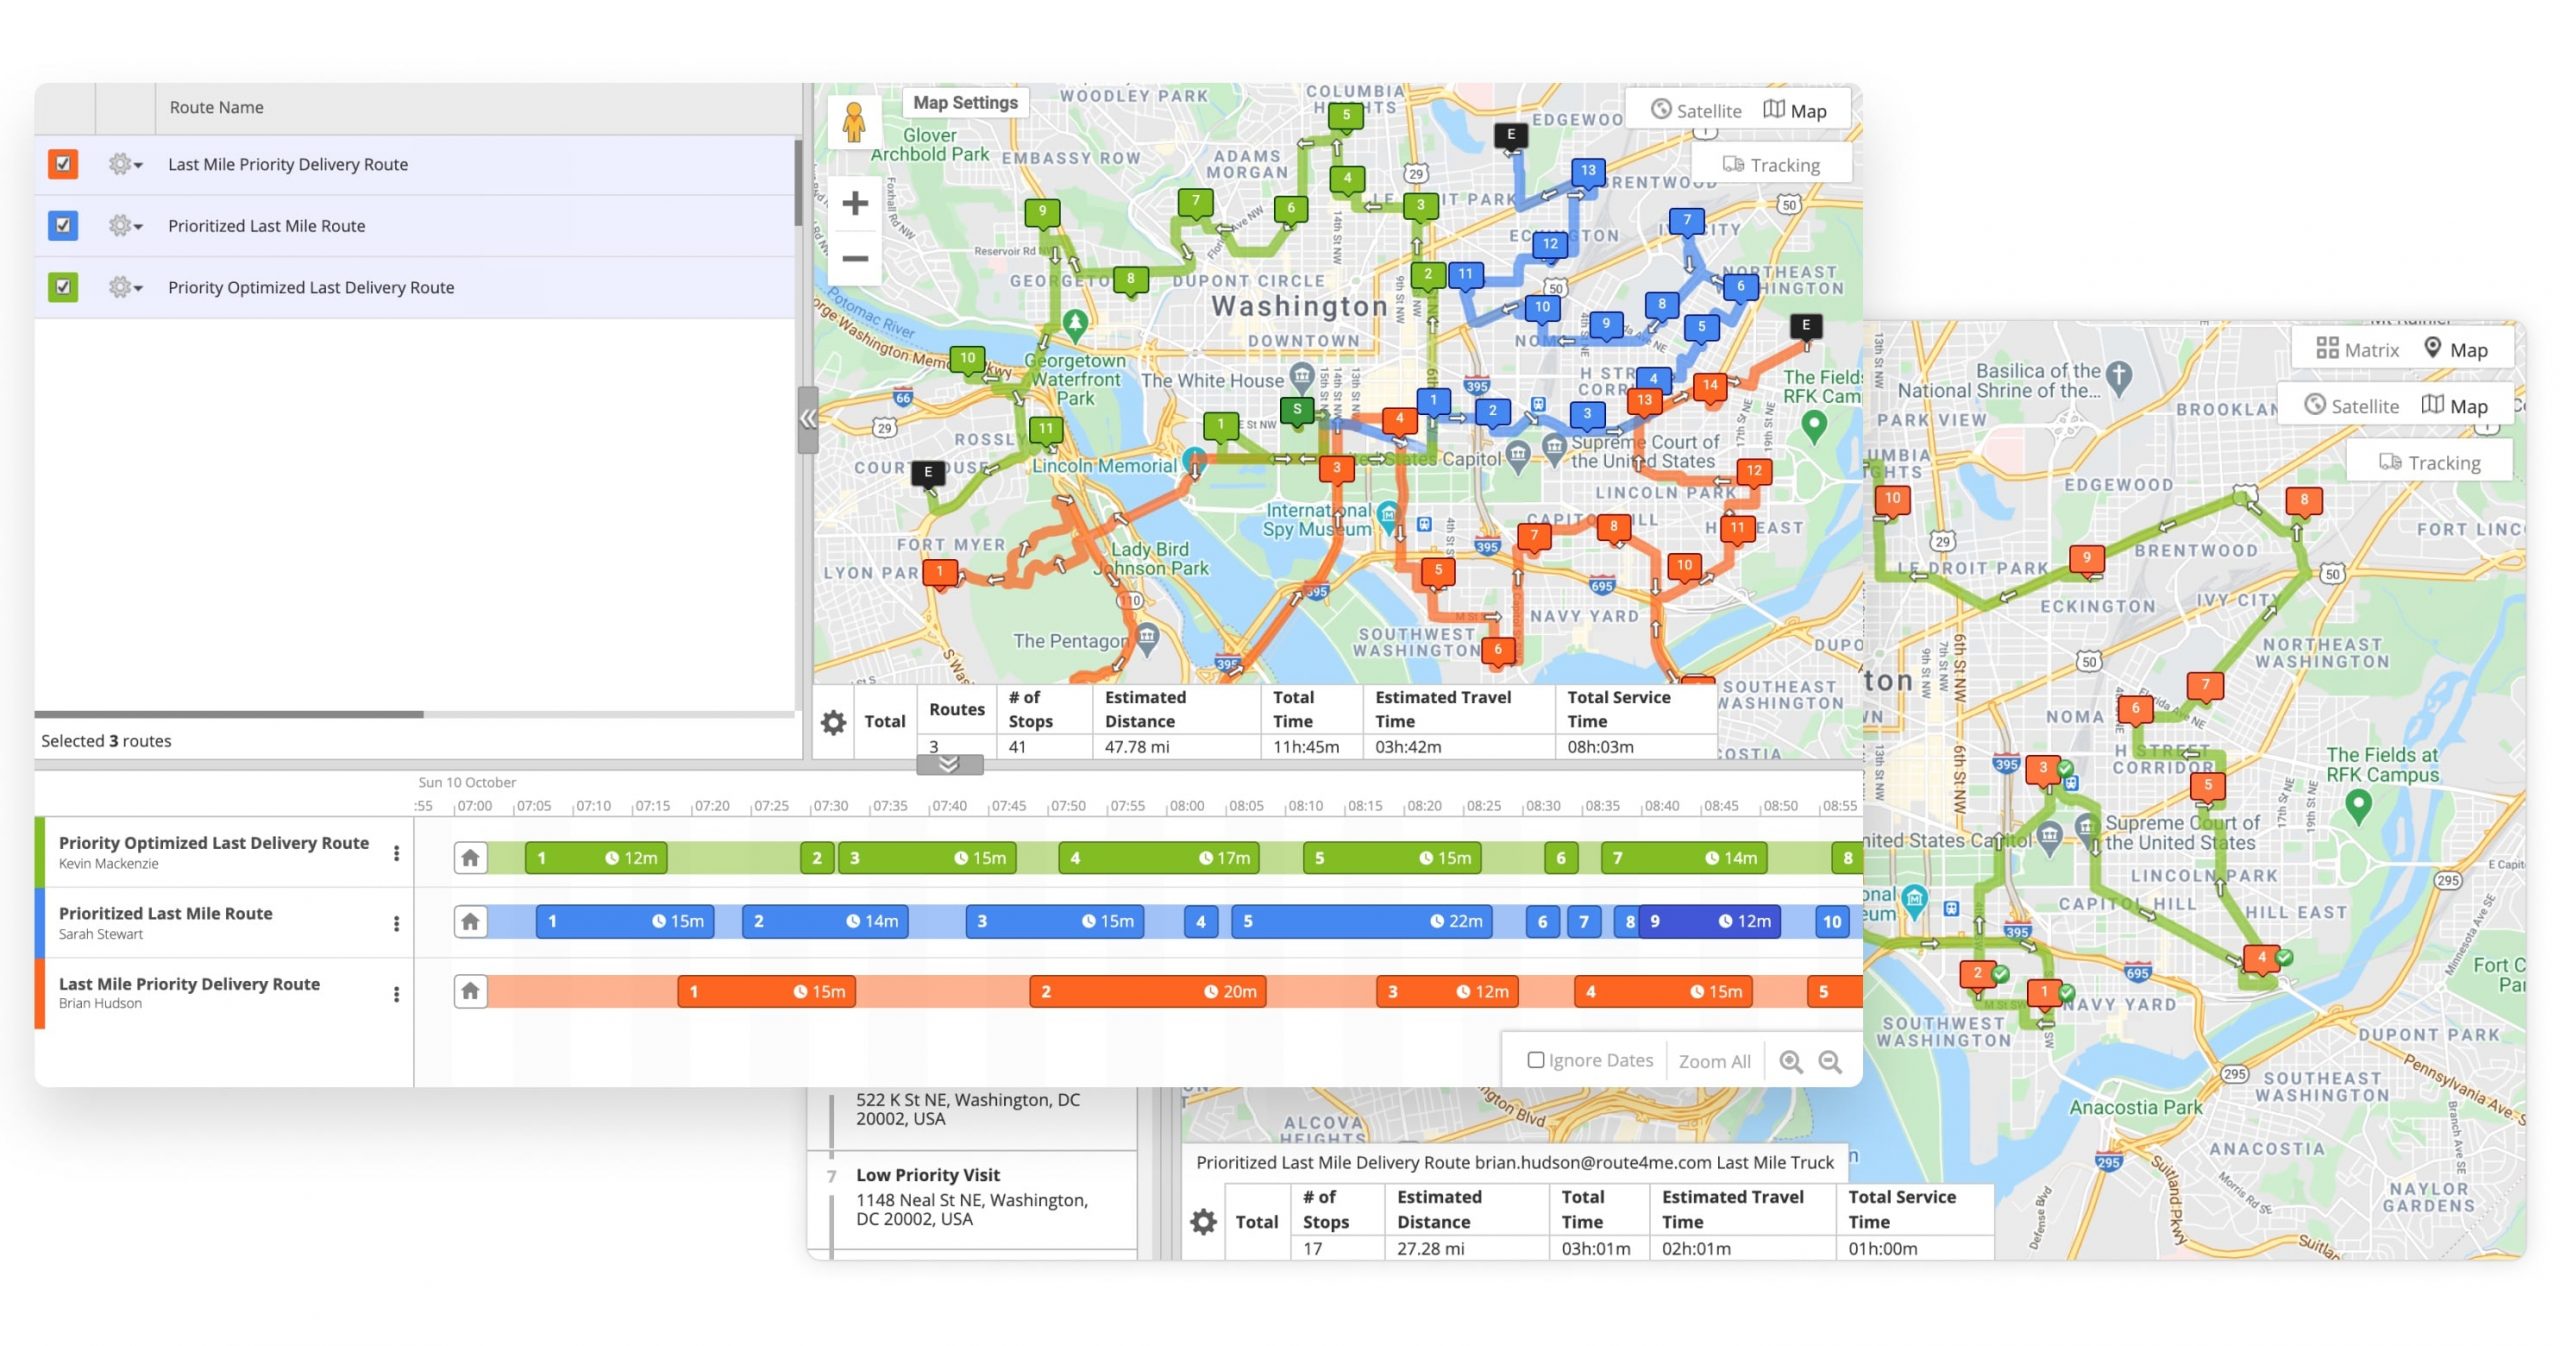 Search for routes, orders, customers, etc., by route attributes on the Route4Me Web Platform.